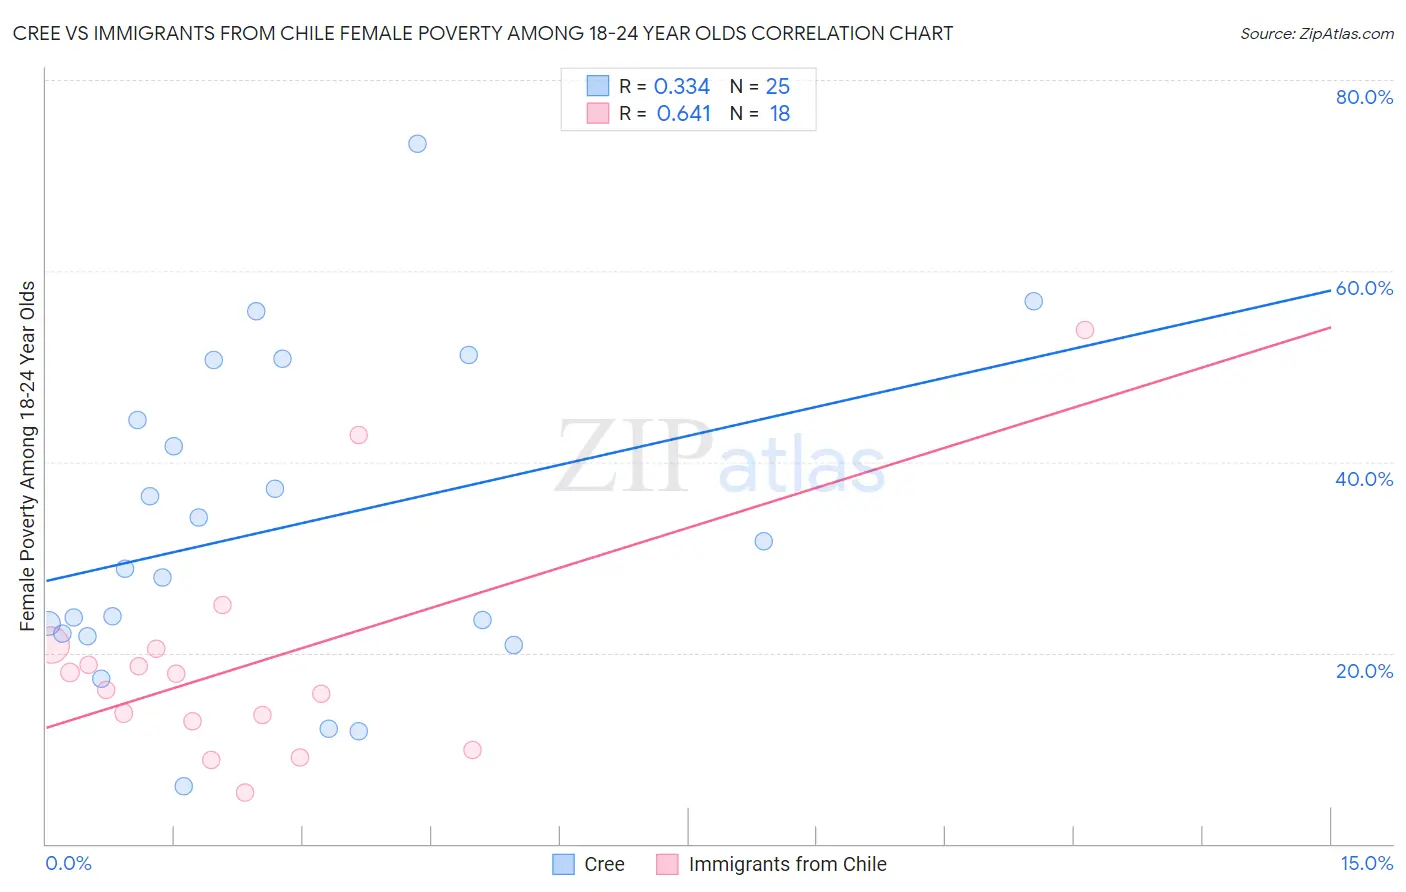 Cree vs Immigrants from Chile Female Poverty Among 18-24 Year Olds